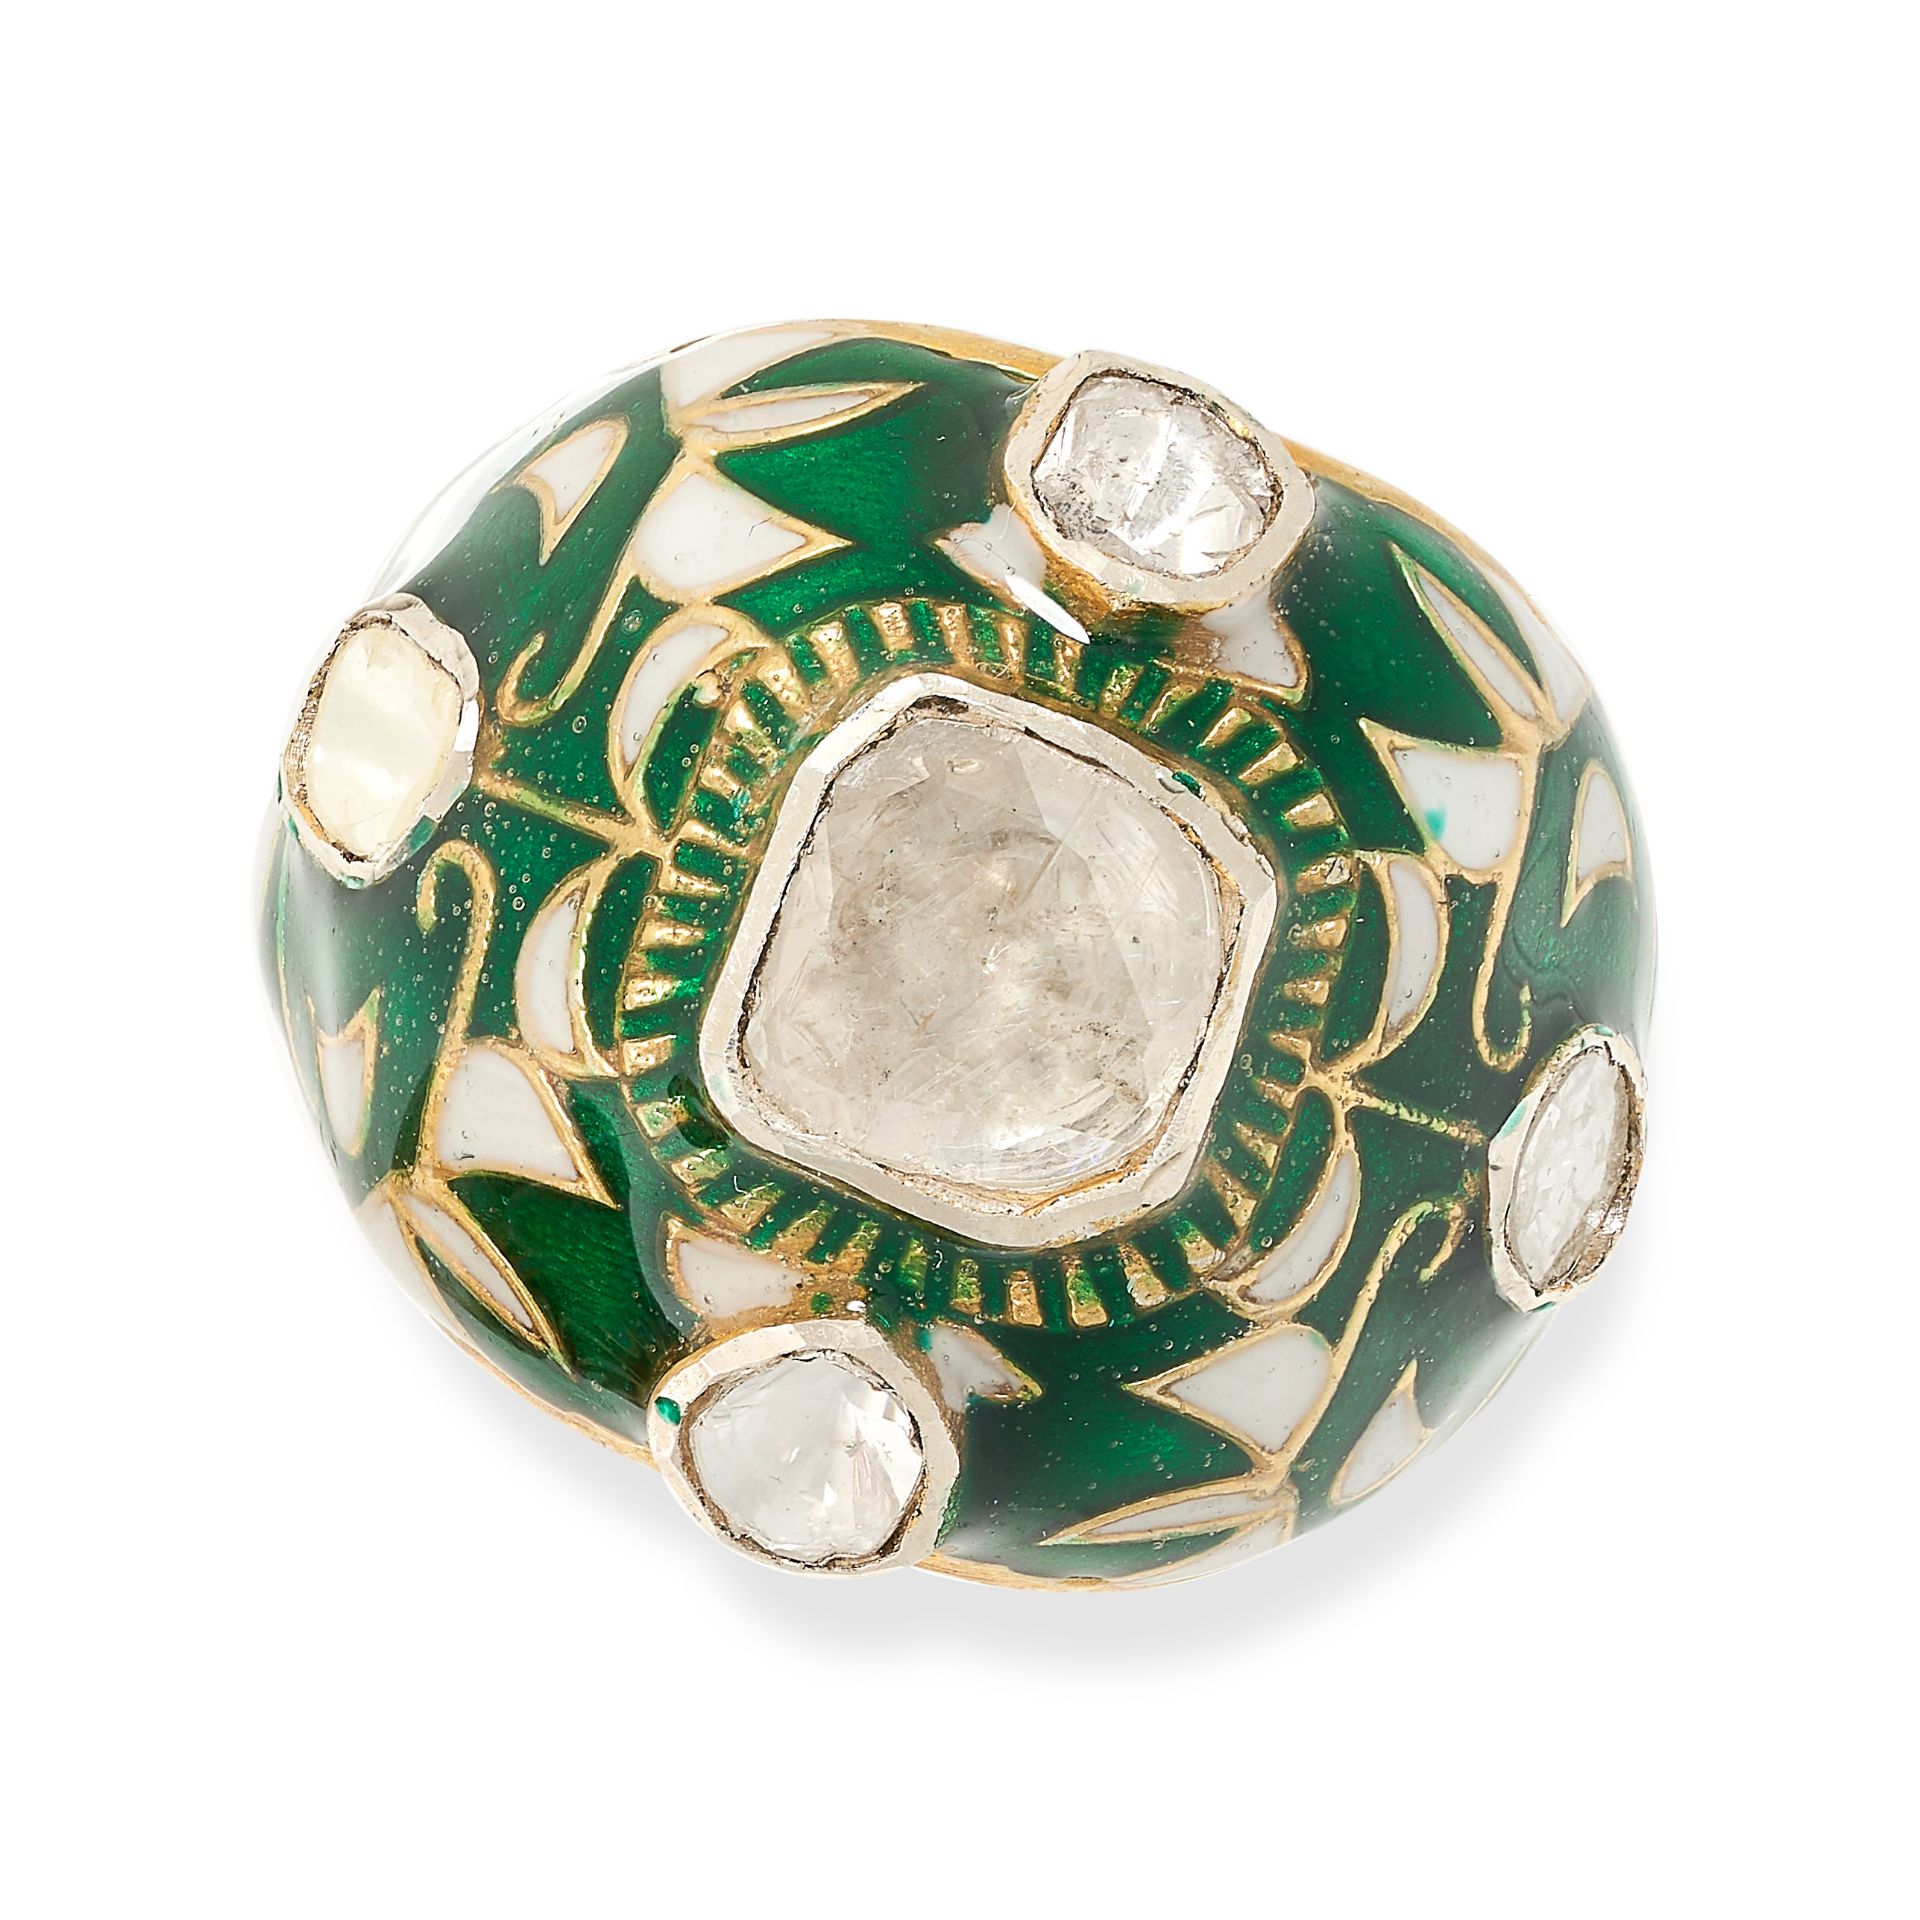 A DIAMOND AND ENAMEL RING set with a flat cut diamond in a border of green and white enamel,